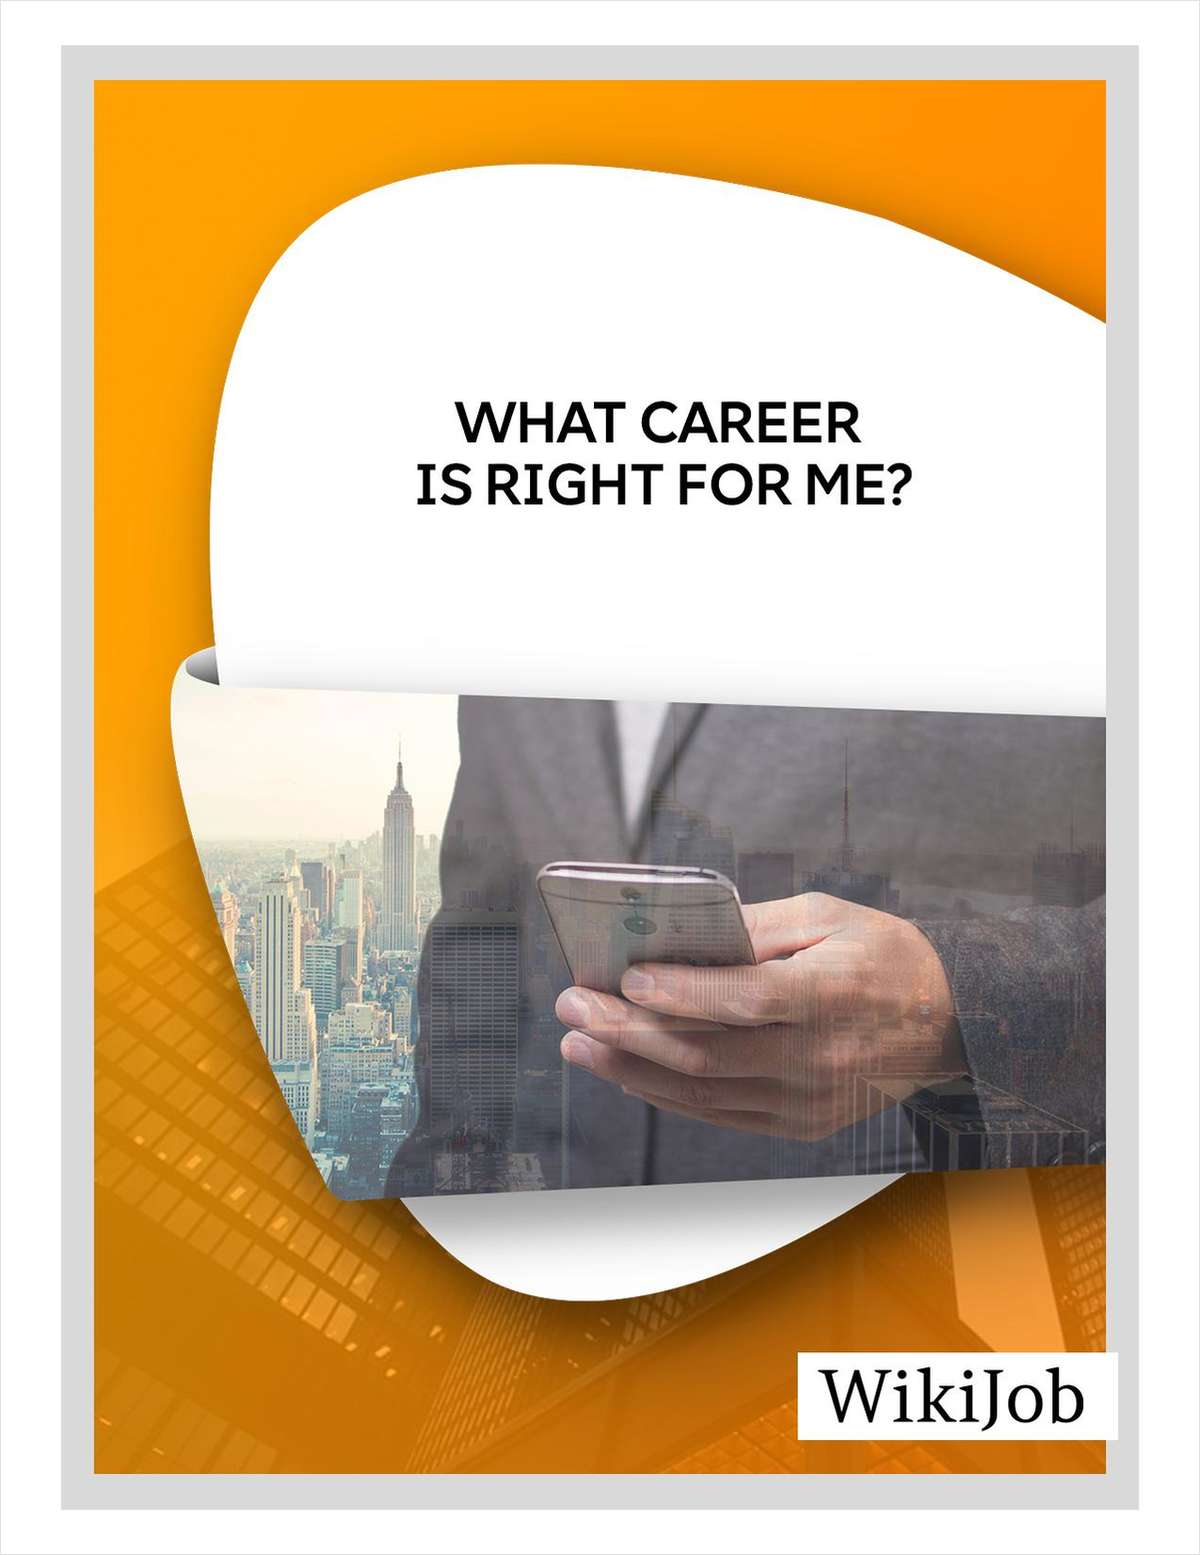 What Career Is Right for Me?